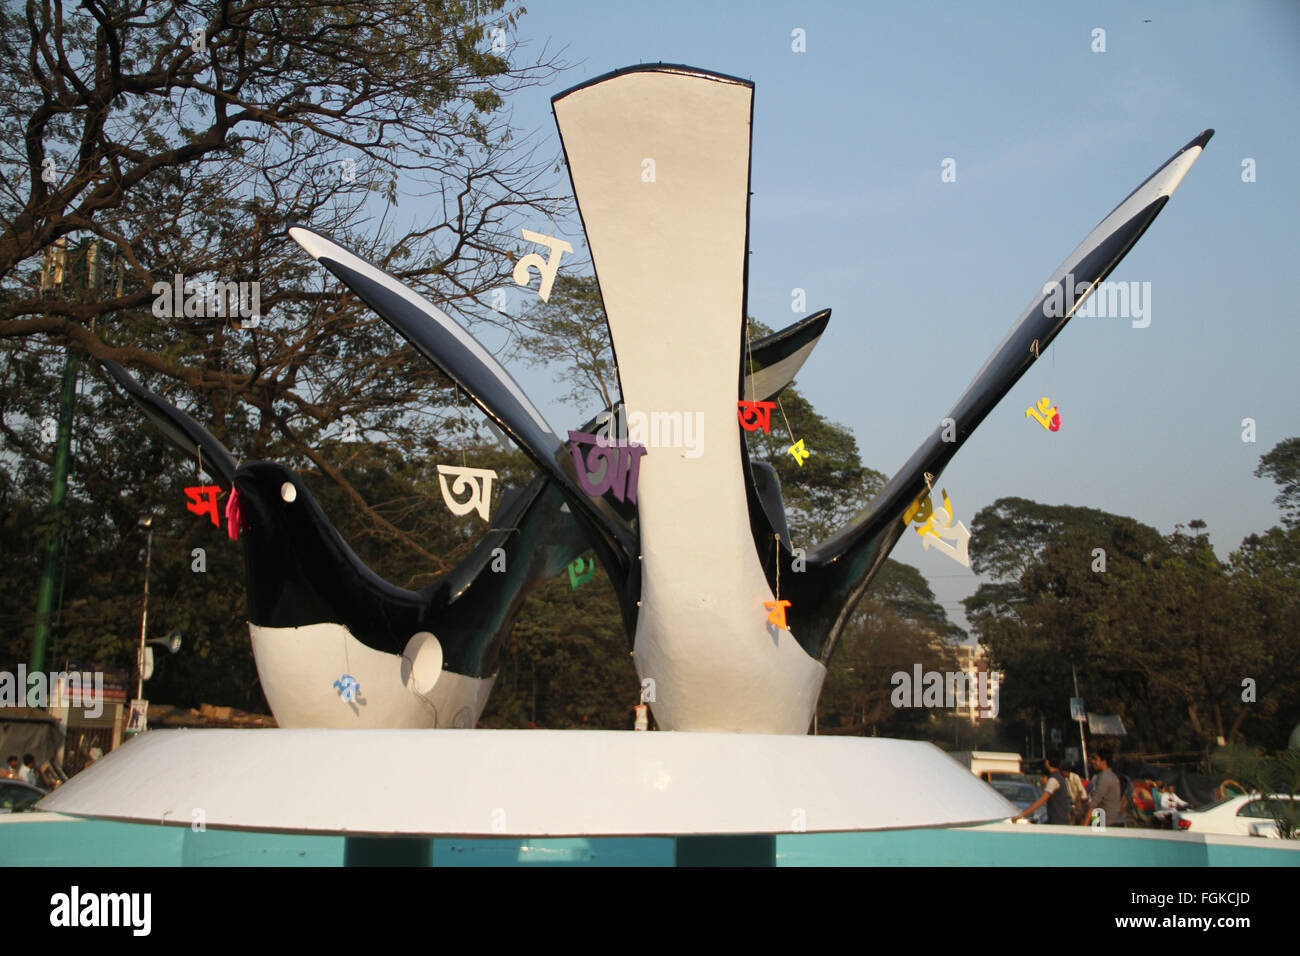 Dhaka, Bangladesh. 20 February, 2016. Bengali alphabet hangs on a monument as part of the decoration for the International Mother Language Day in Dhaka, Bangladesh on 20 February, 2016. United Nations Educational, Scientific and Cultural Organization declared 21 February the International Mother Language Day on Nov. 17, 1999 to honor the supreme sacrifice of language martyrs. Credit:  Rehman Asad/Alamy Live News Stock Photo